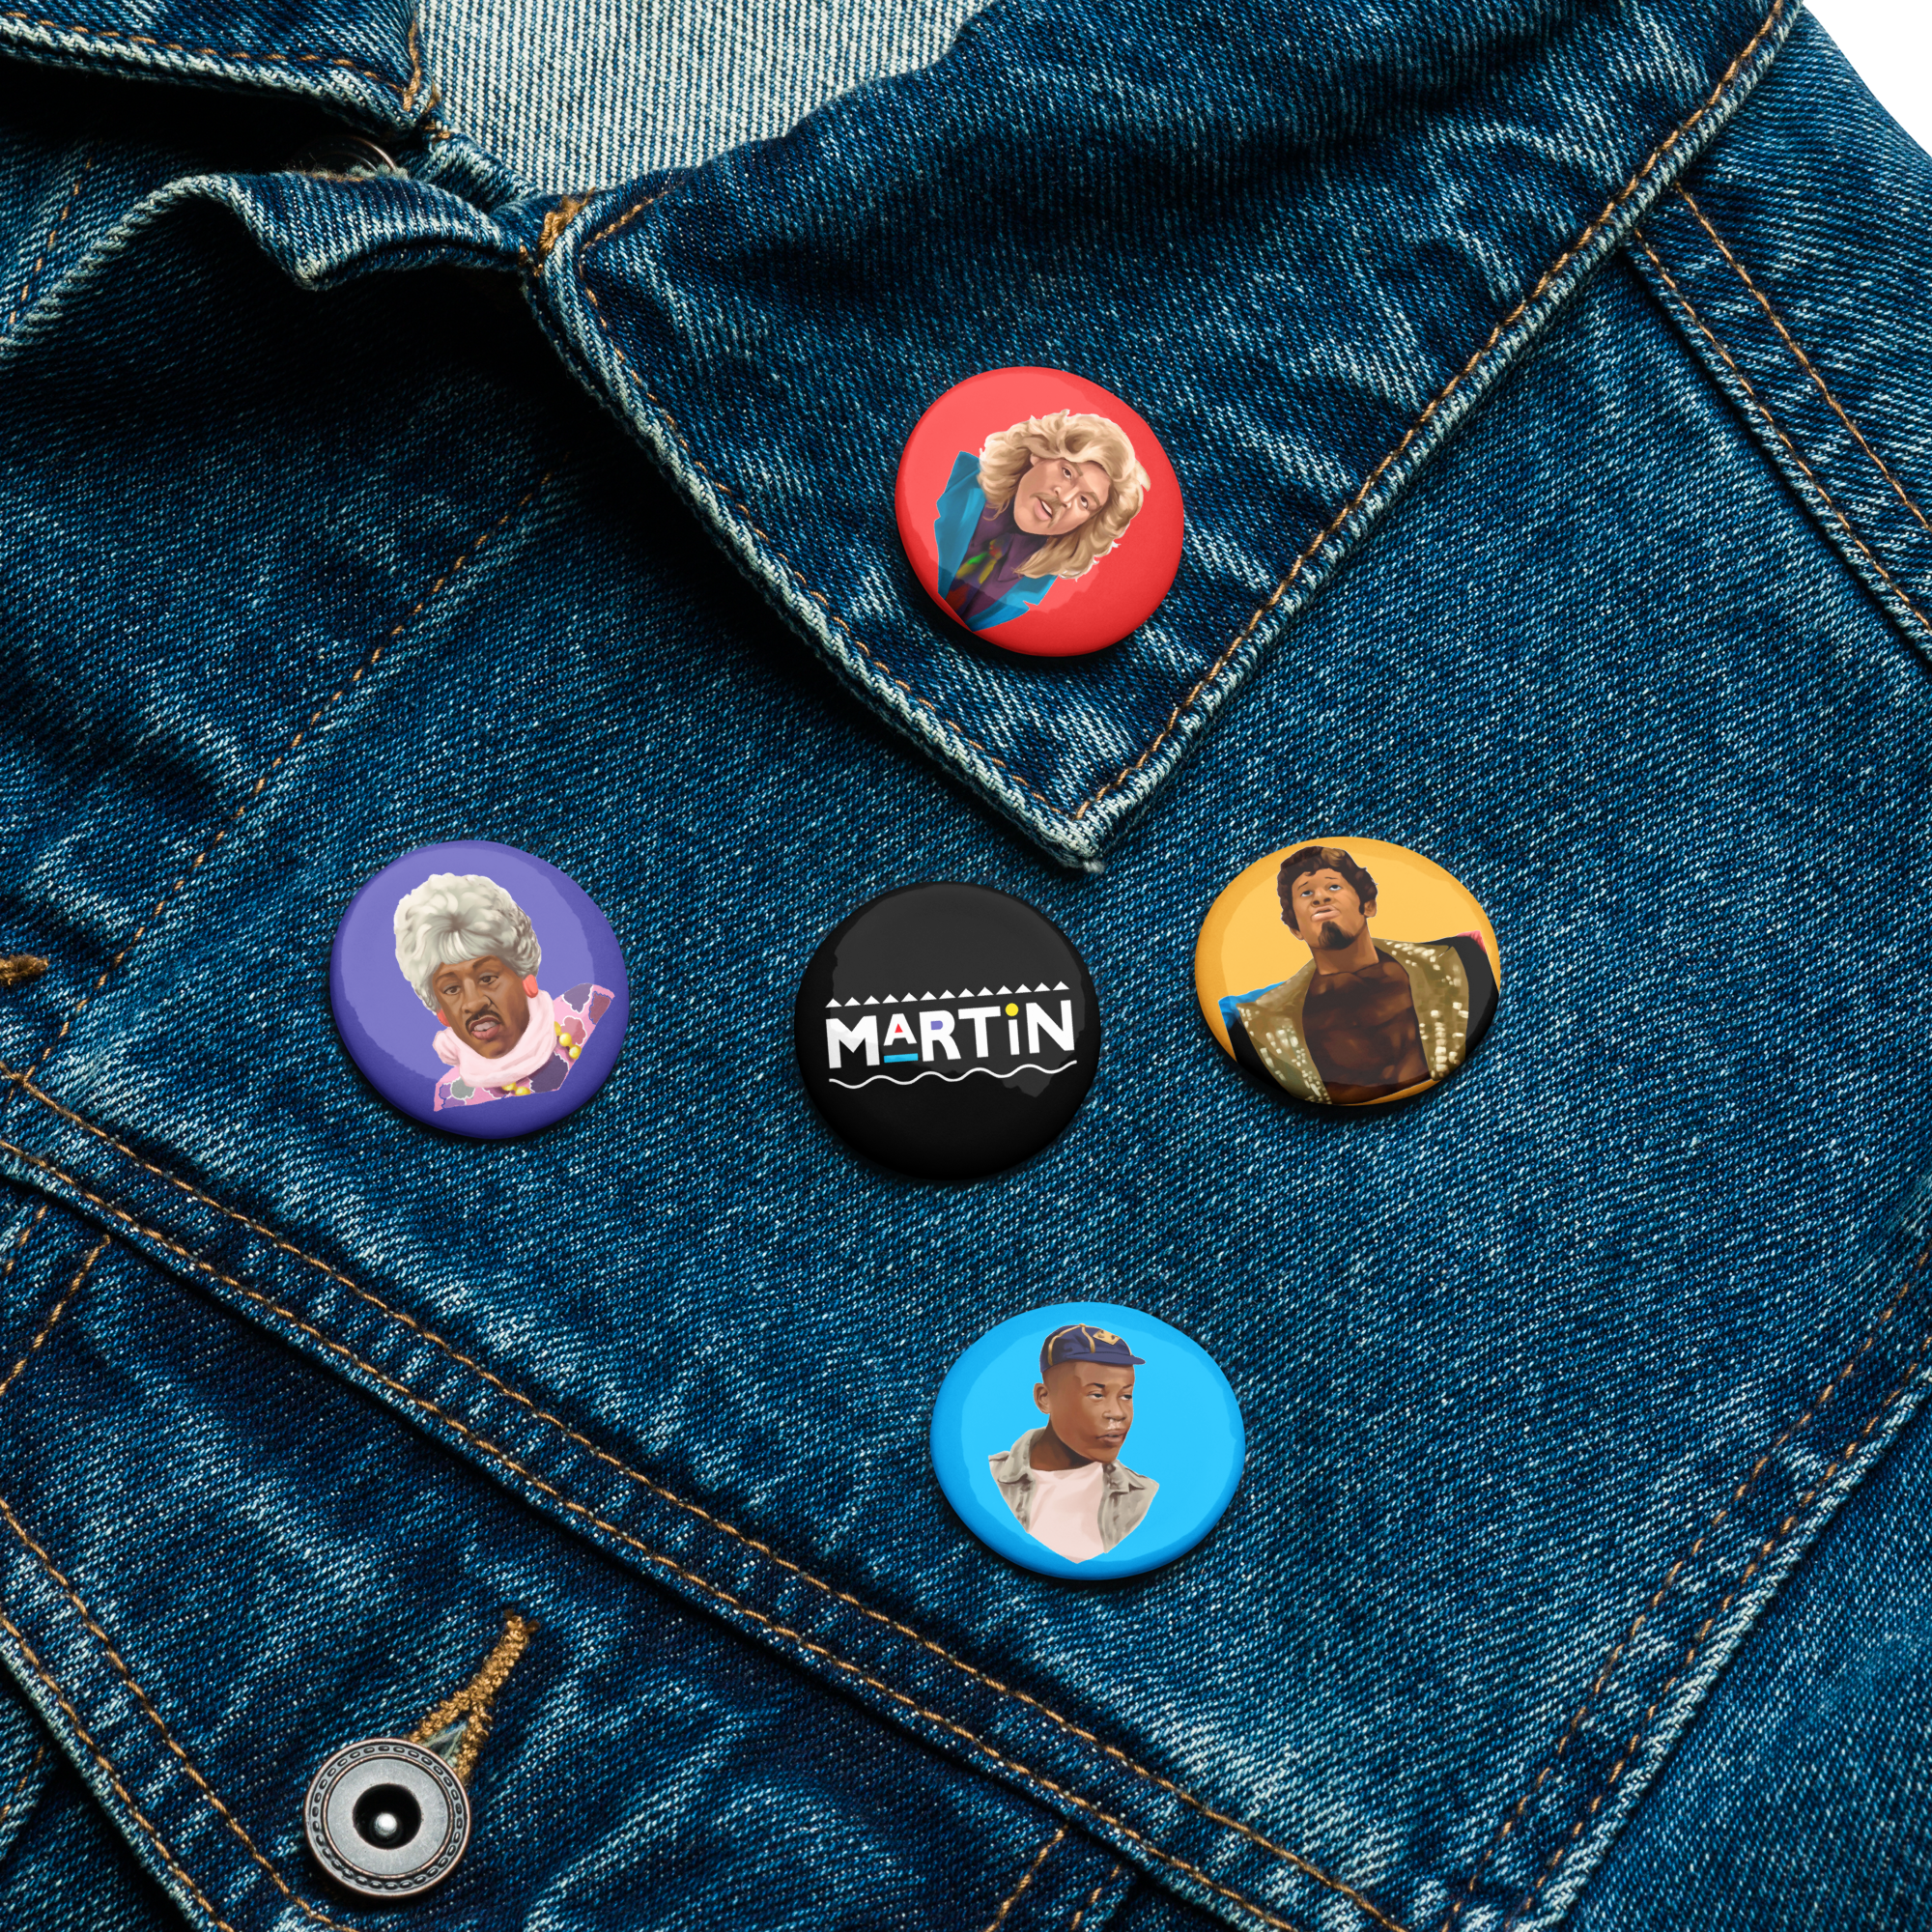 Set 2 of Character Pin Buttons